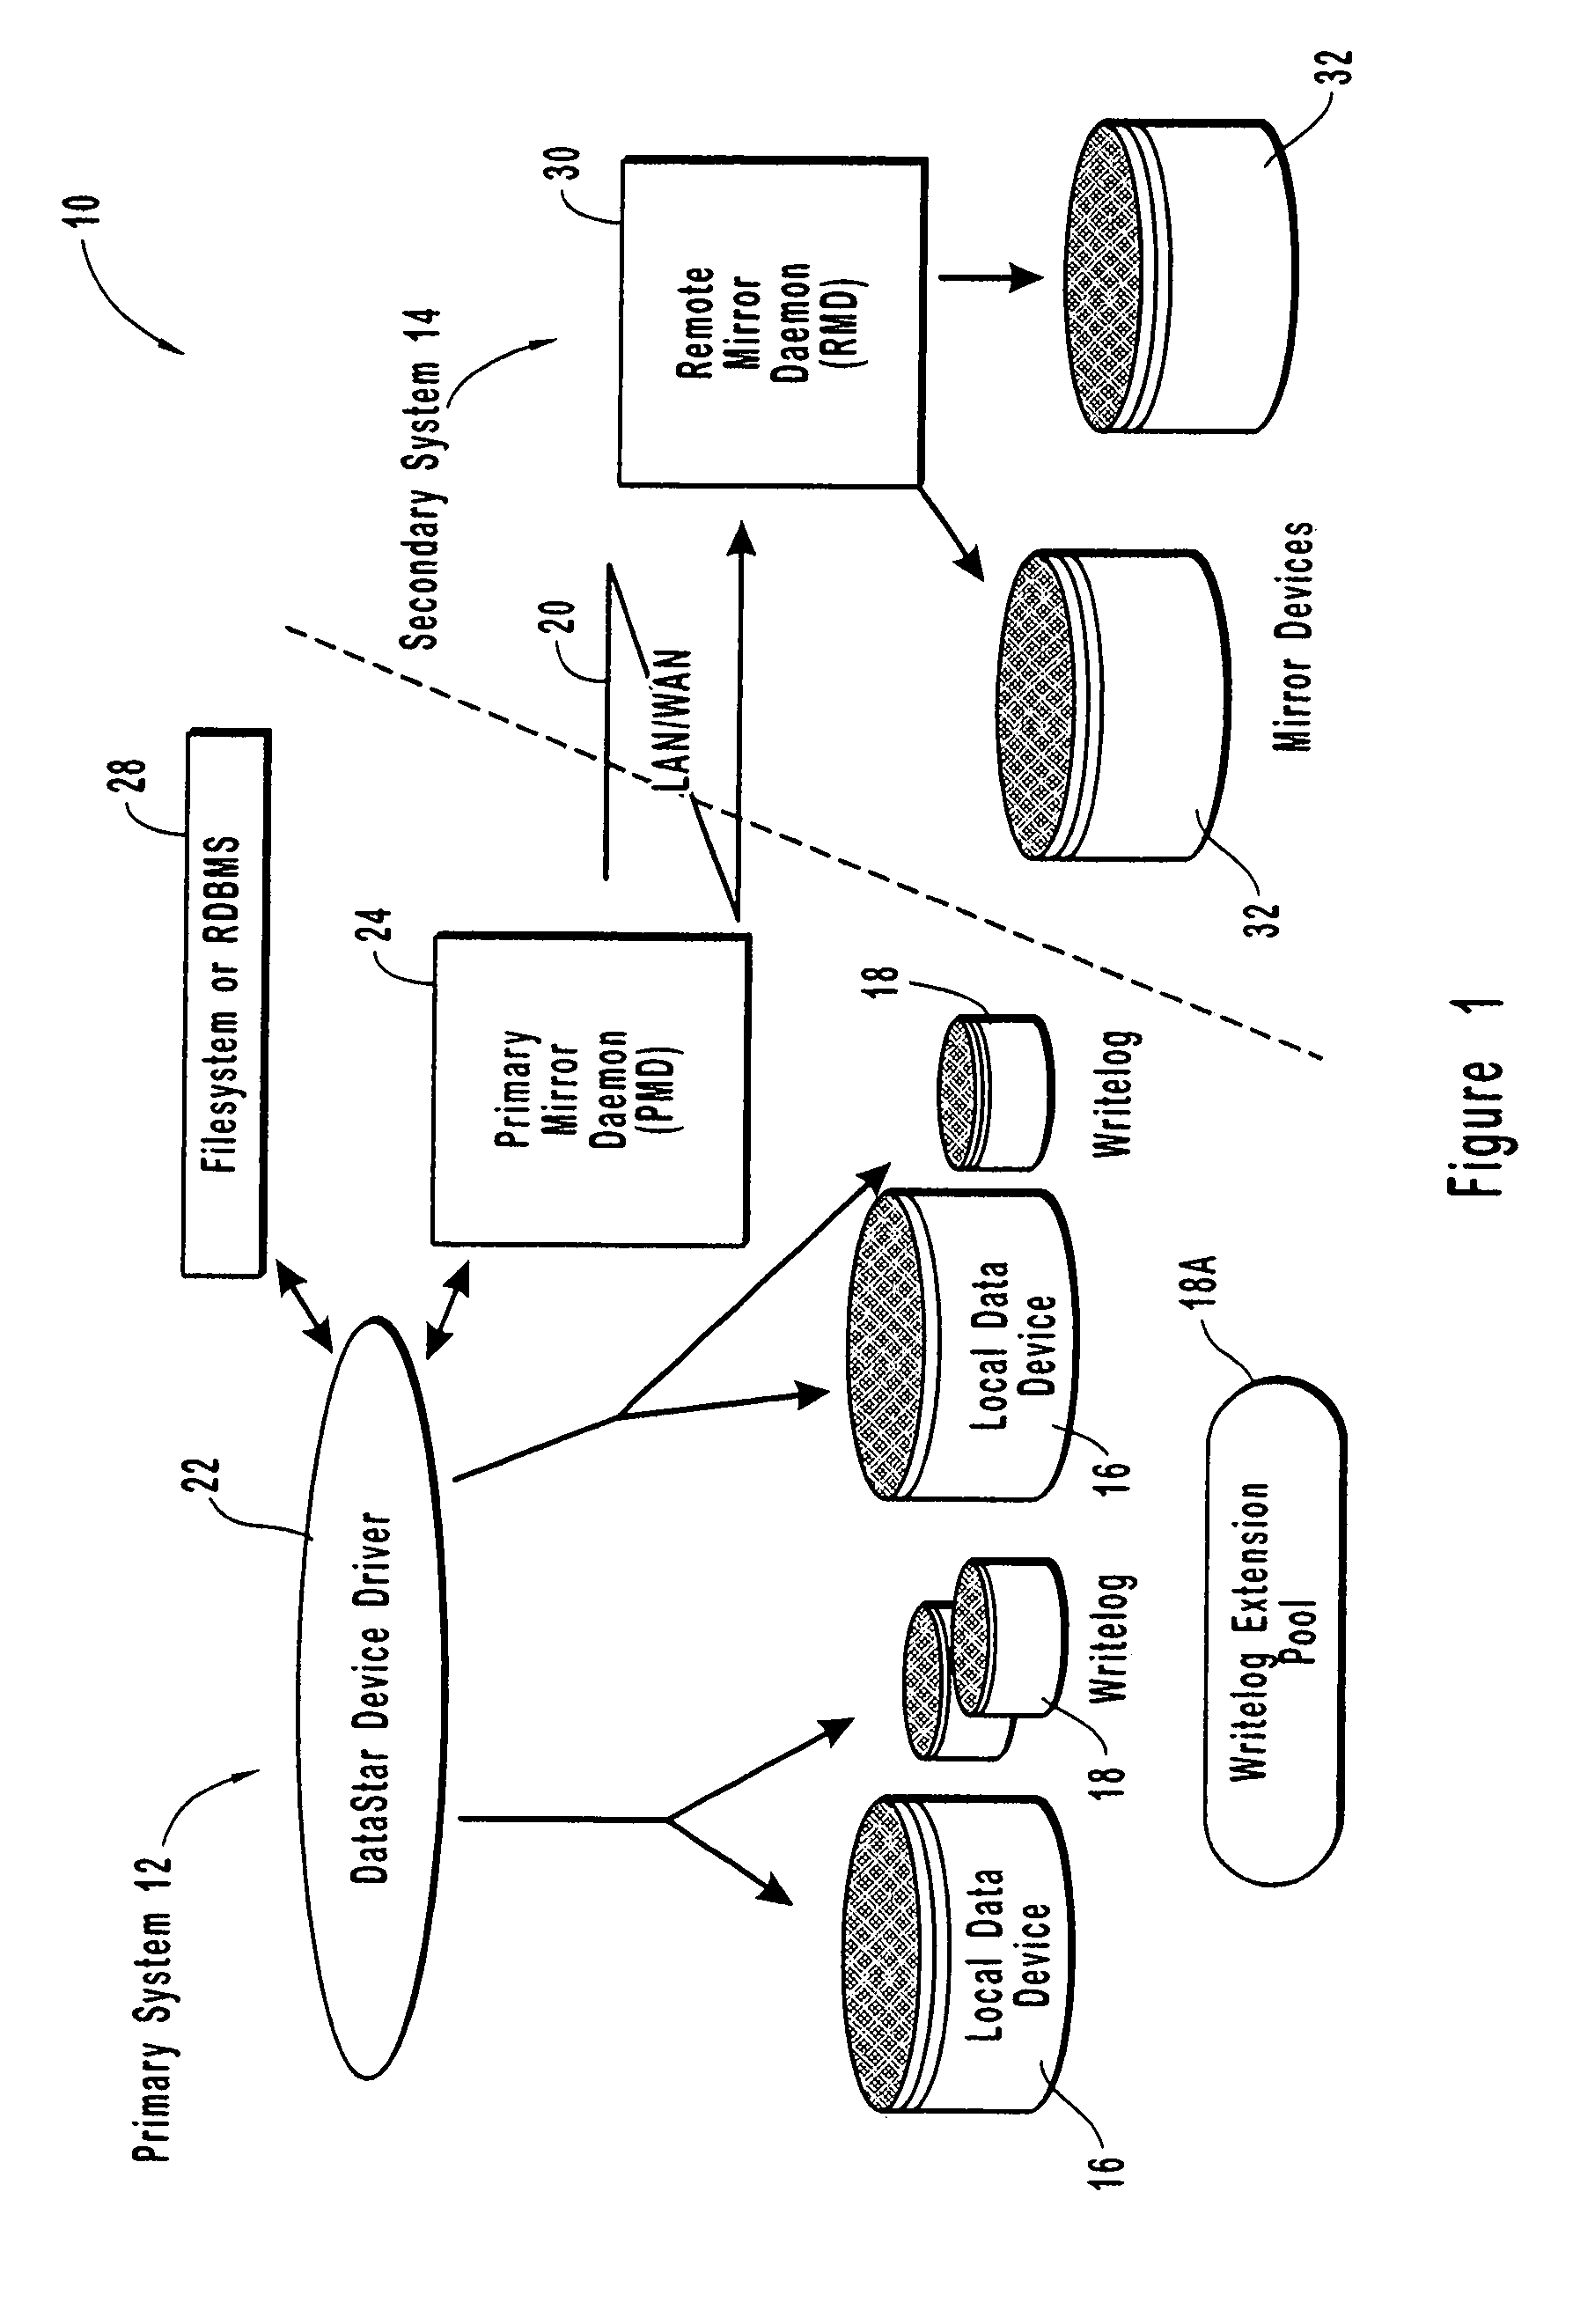 Resource allocation throttling in remote data mirroring system